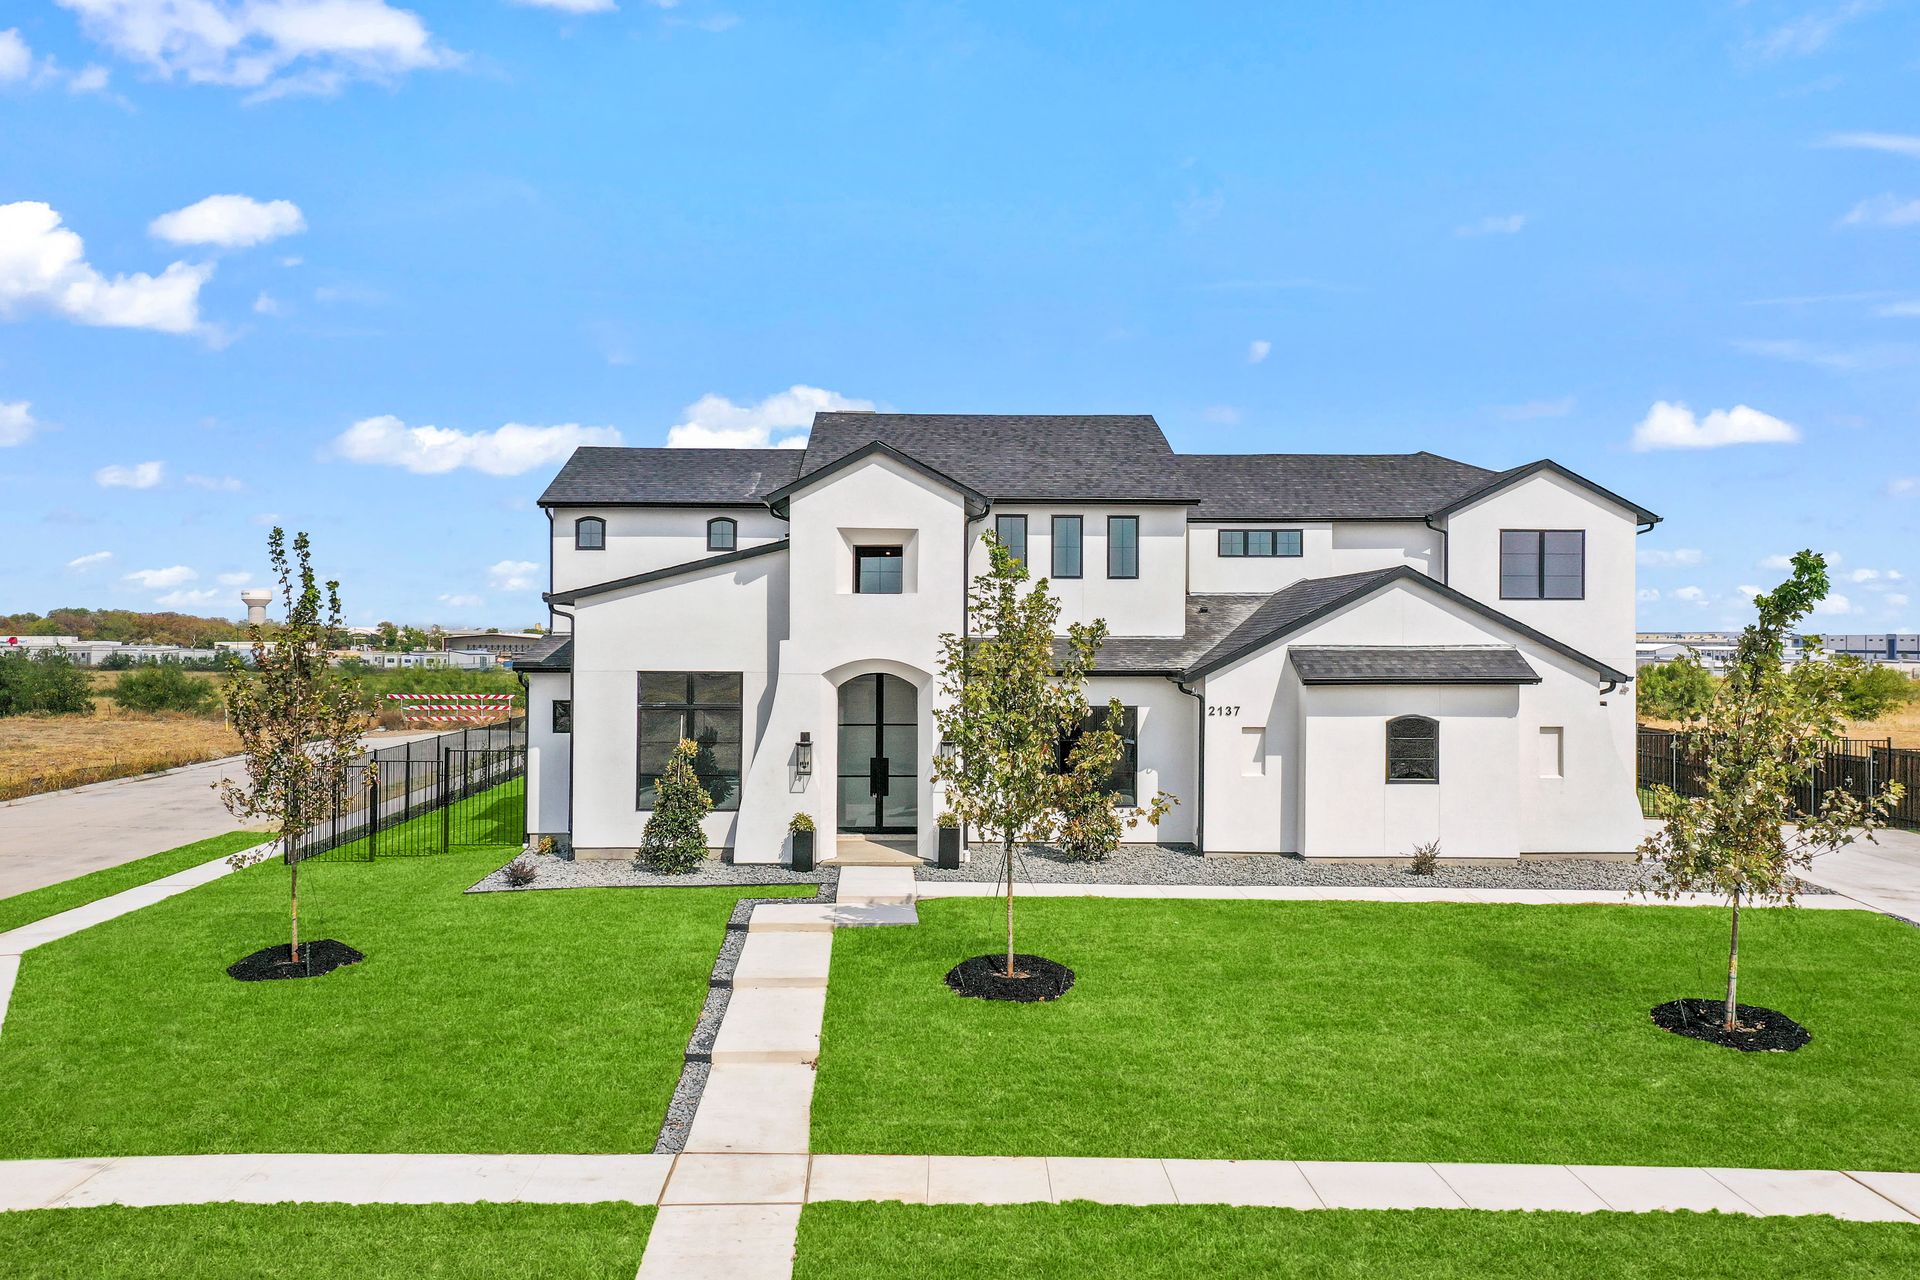 Modern custom home in Southlake, Texas, with a pristine lawn and clear blue sky.
